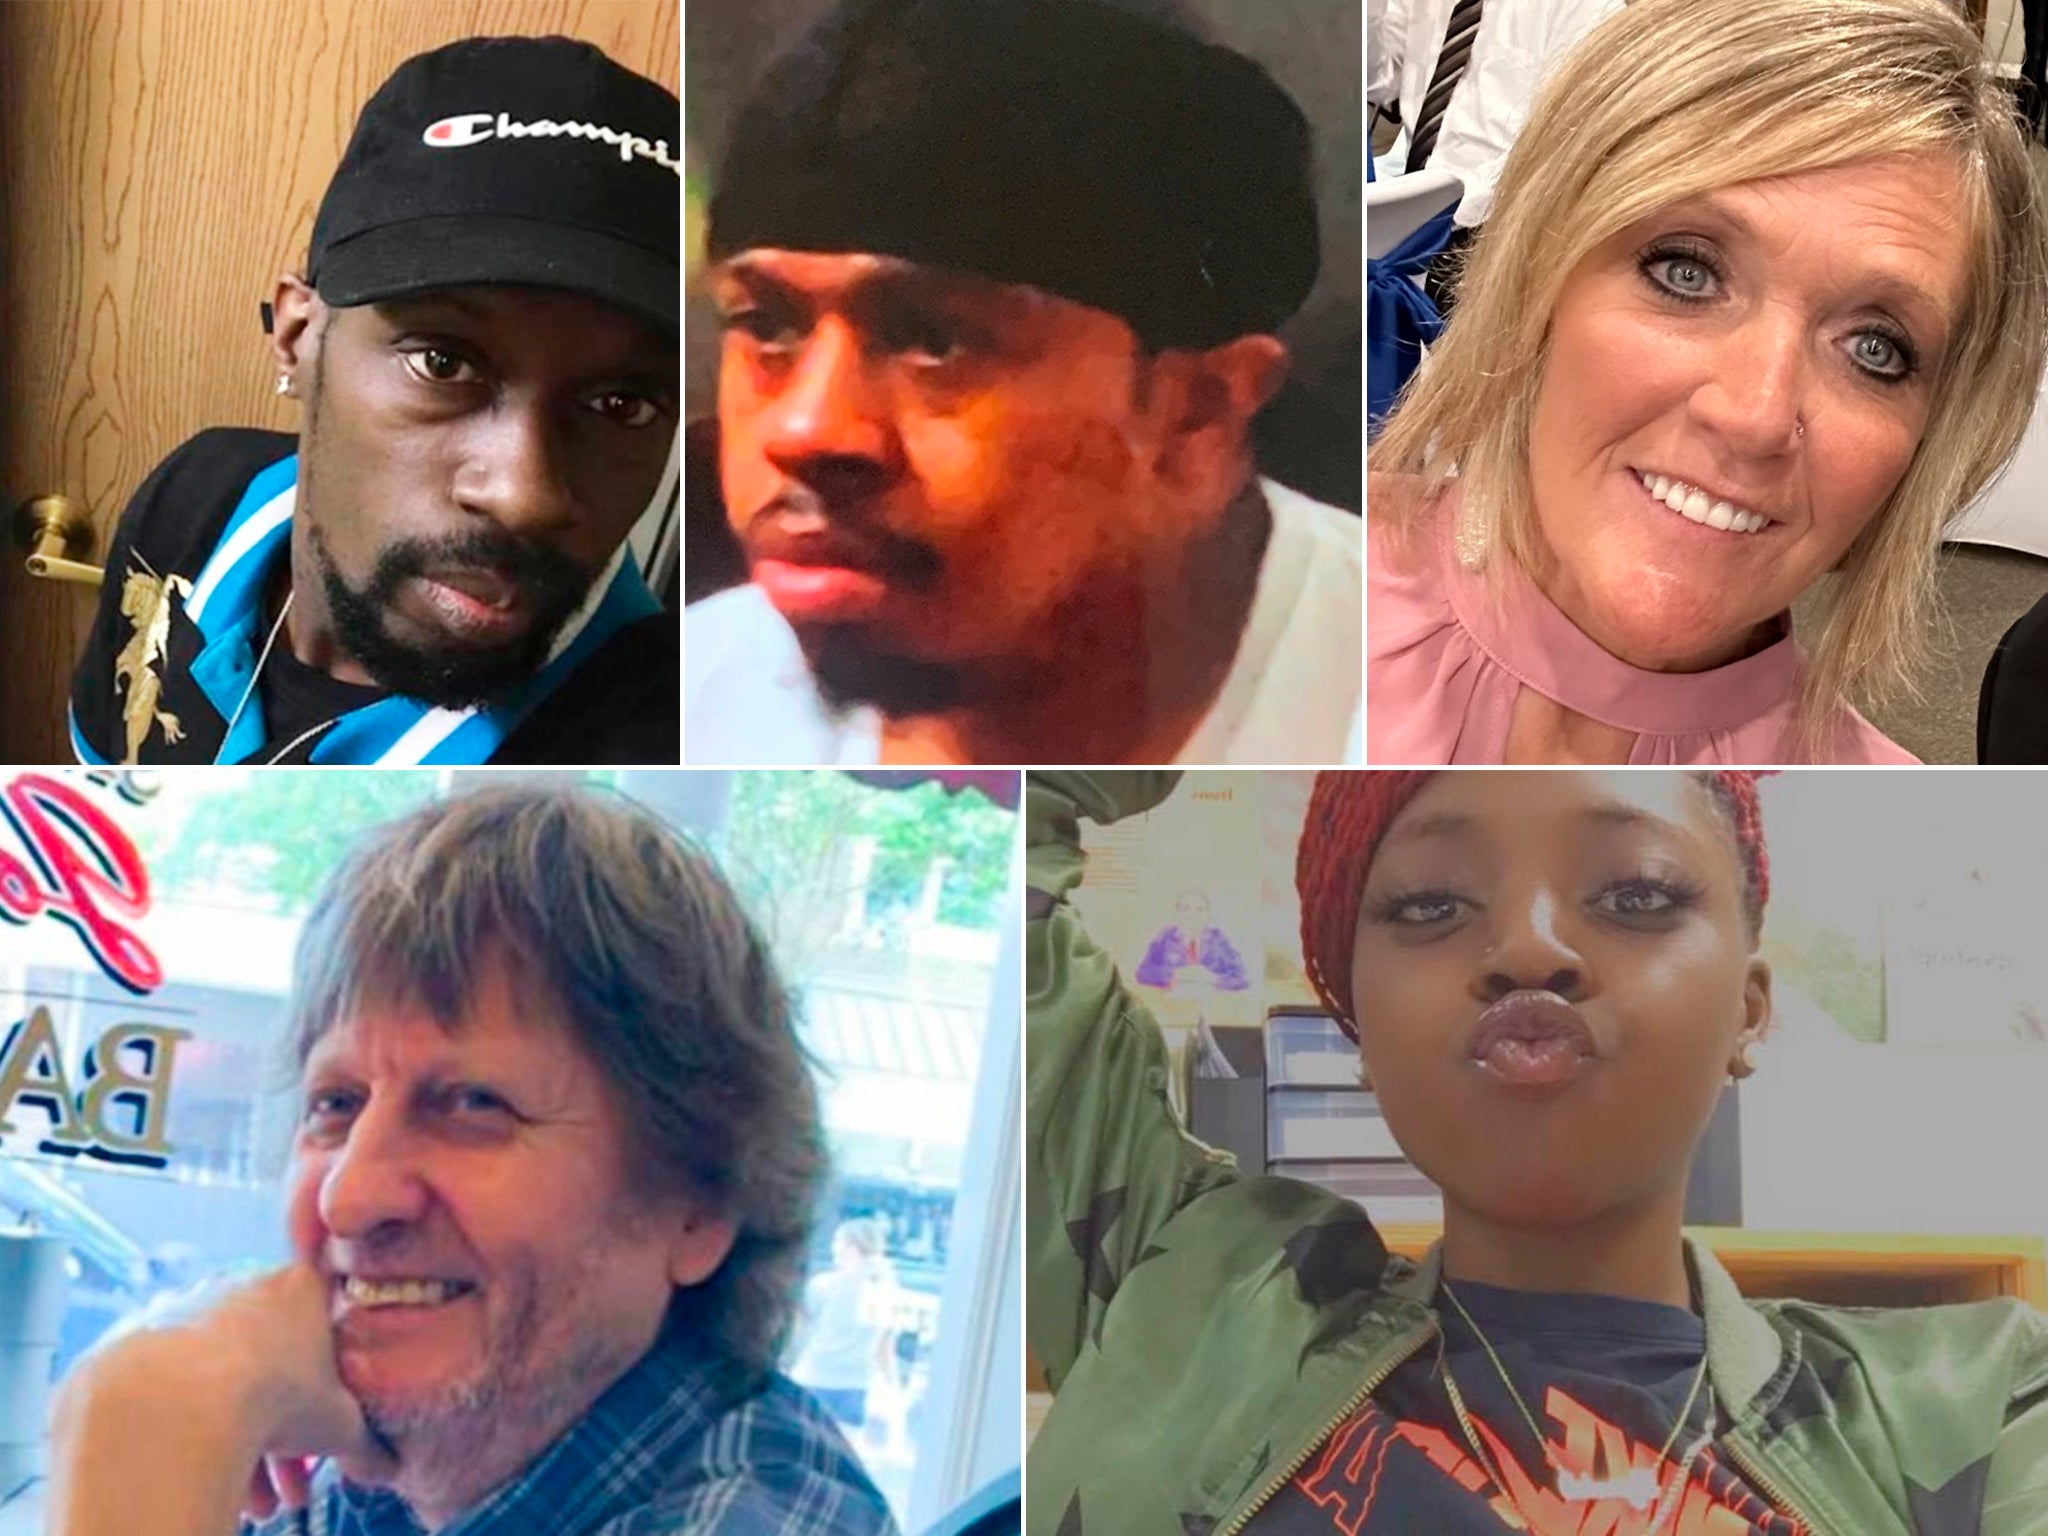 Six Walmart employees were killed in the attack including Lorenzo Gamble, Brian Pendleton, Kellie Pyle, Randall Blevins, and Tyneka Johnson. The sixth victim, a 16-year-old boy from Chesapeake, has not been publicly named as he is a minor